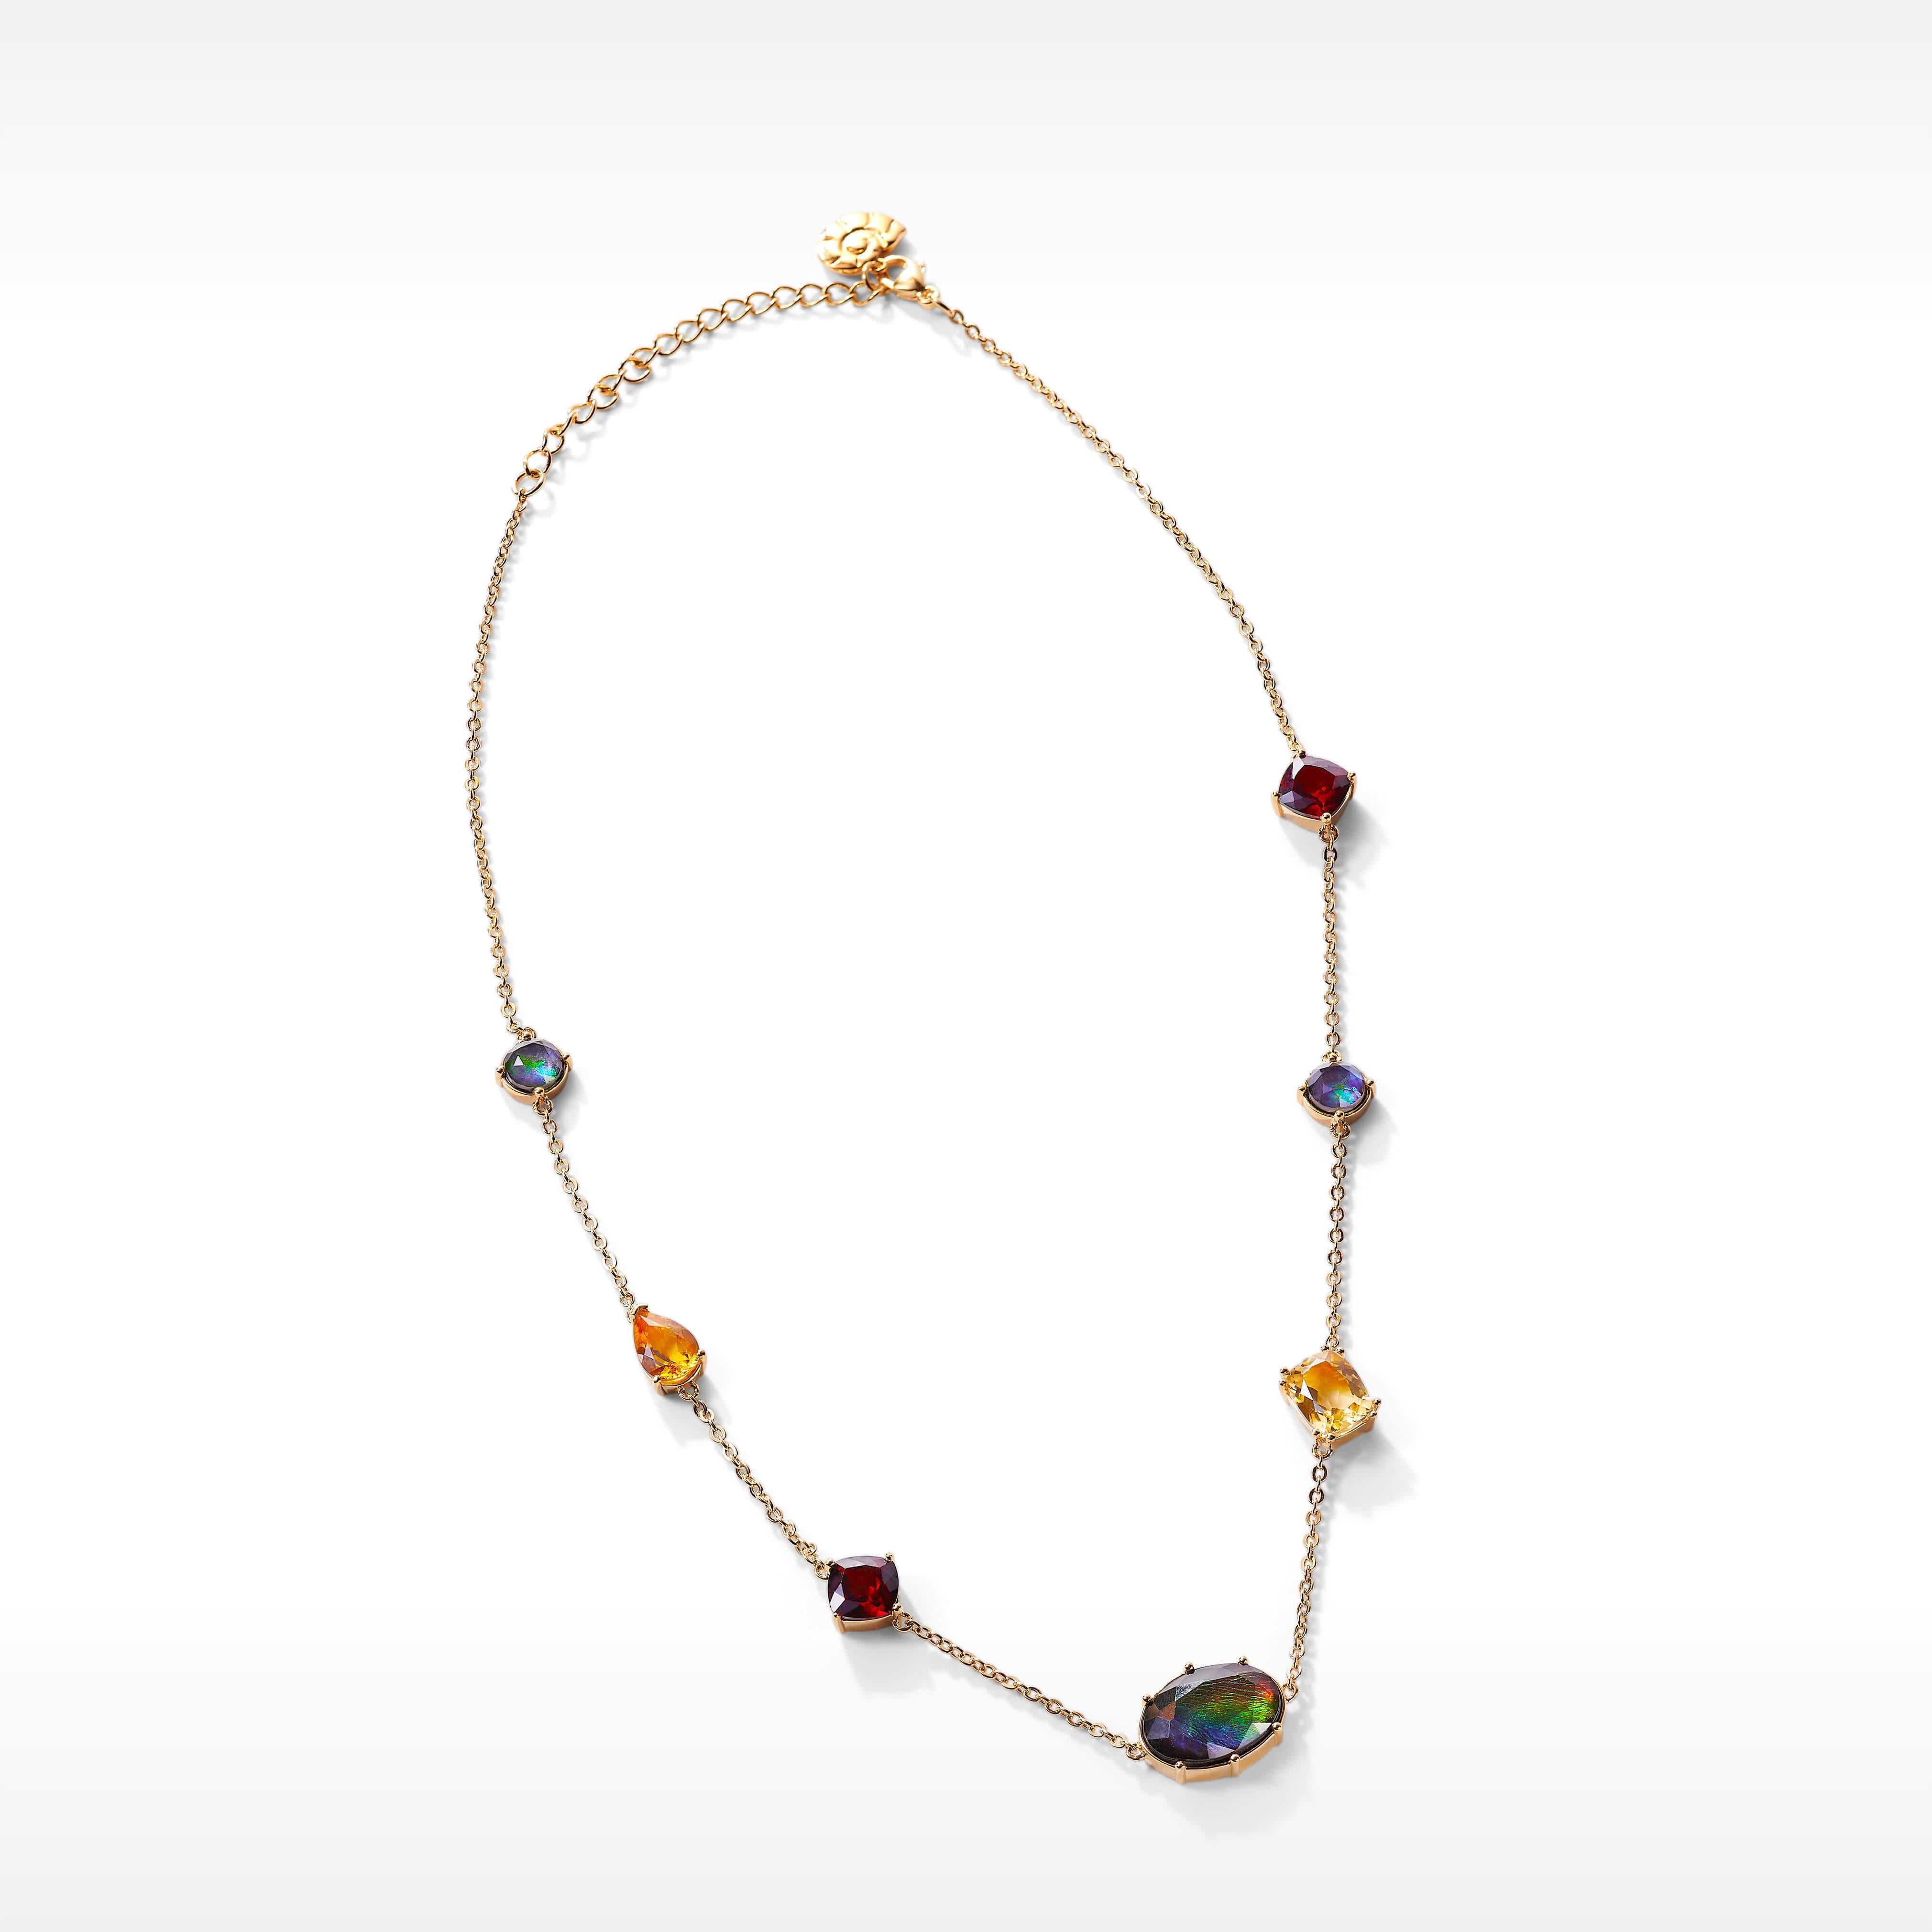 Product Details:
The Radiant collection features striking ammolite clustered with citrine, garnet and white topaz in a celebration of festive gathering seasons.

AA grade Ammolite
10mm x 14mm oval and 6mm round (2) Ammolite station necklace
18K gold